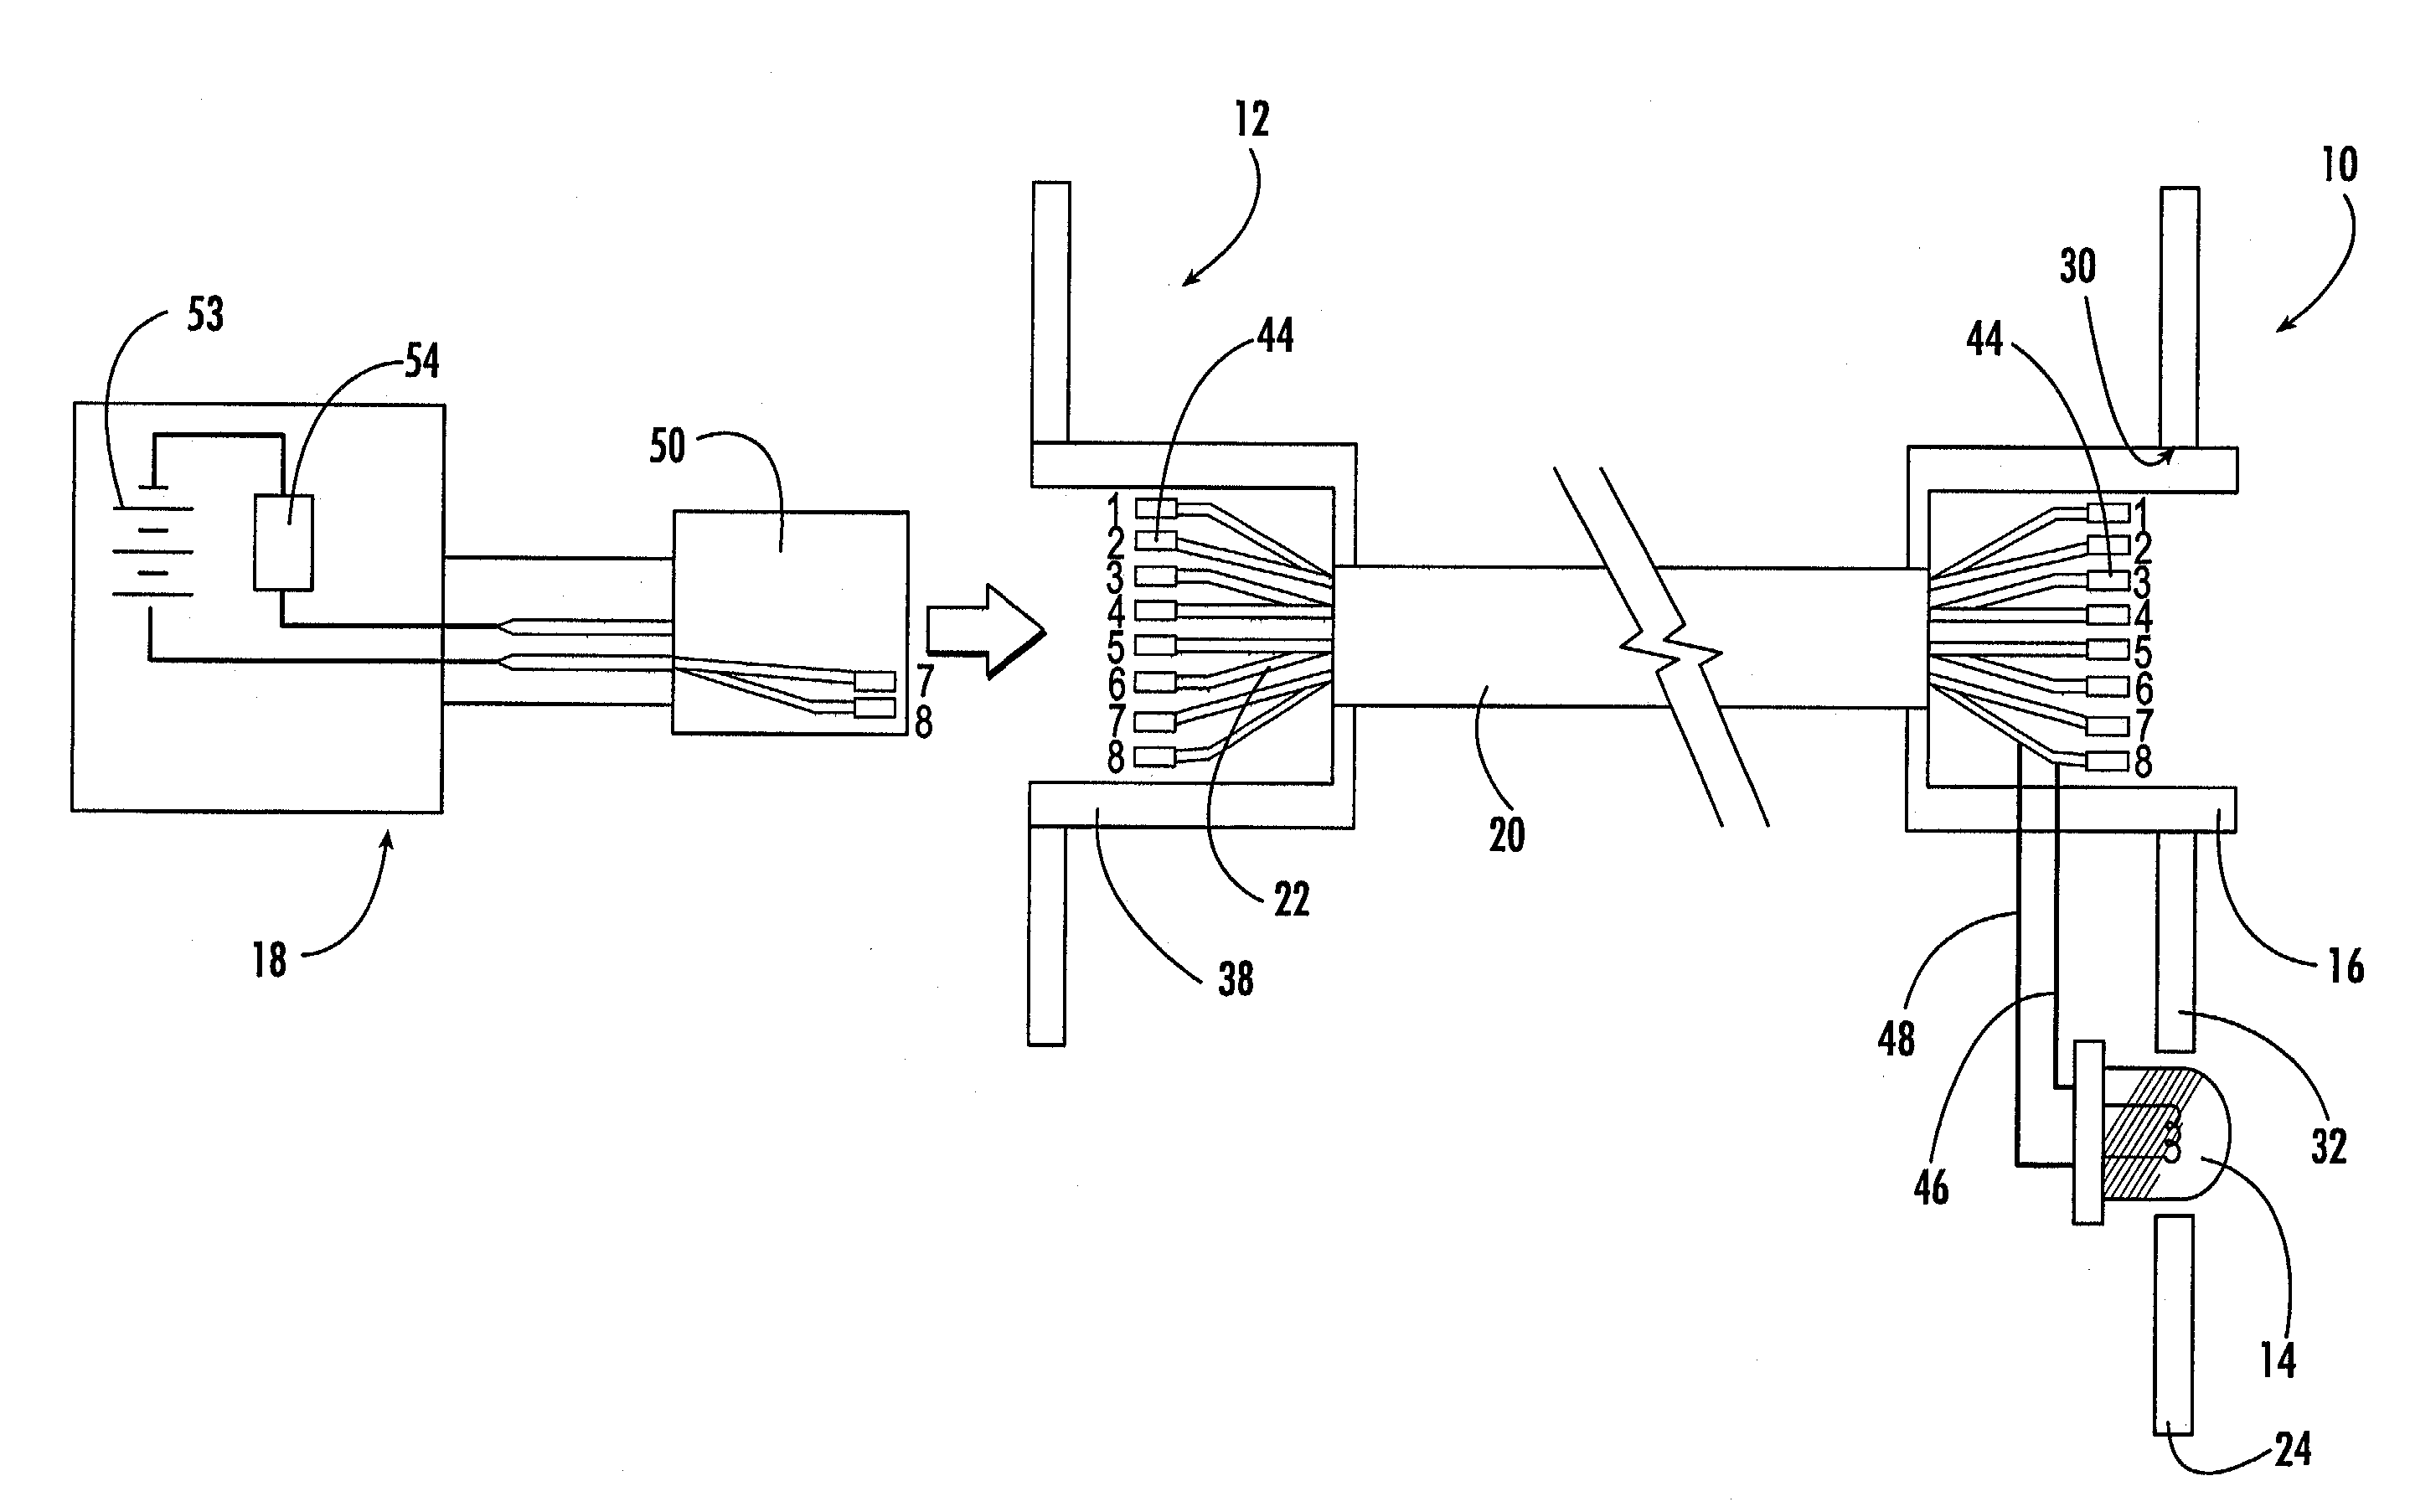 Testing assembly and method for identifying network circuits